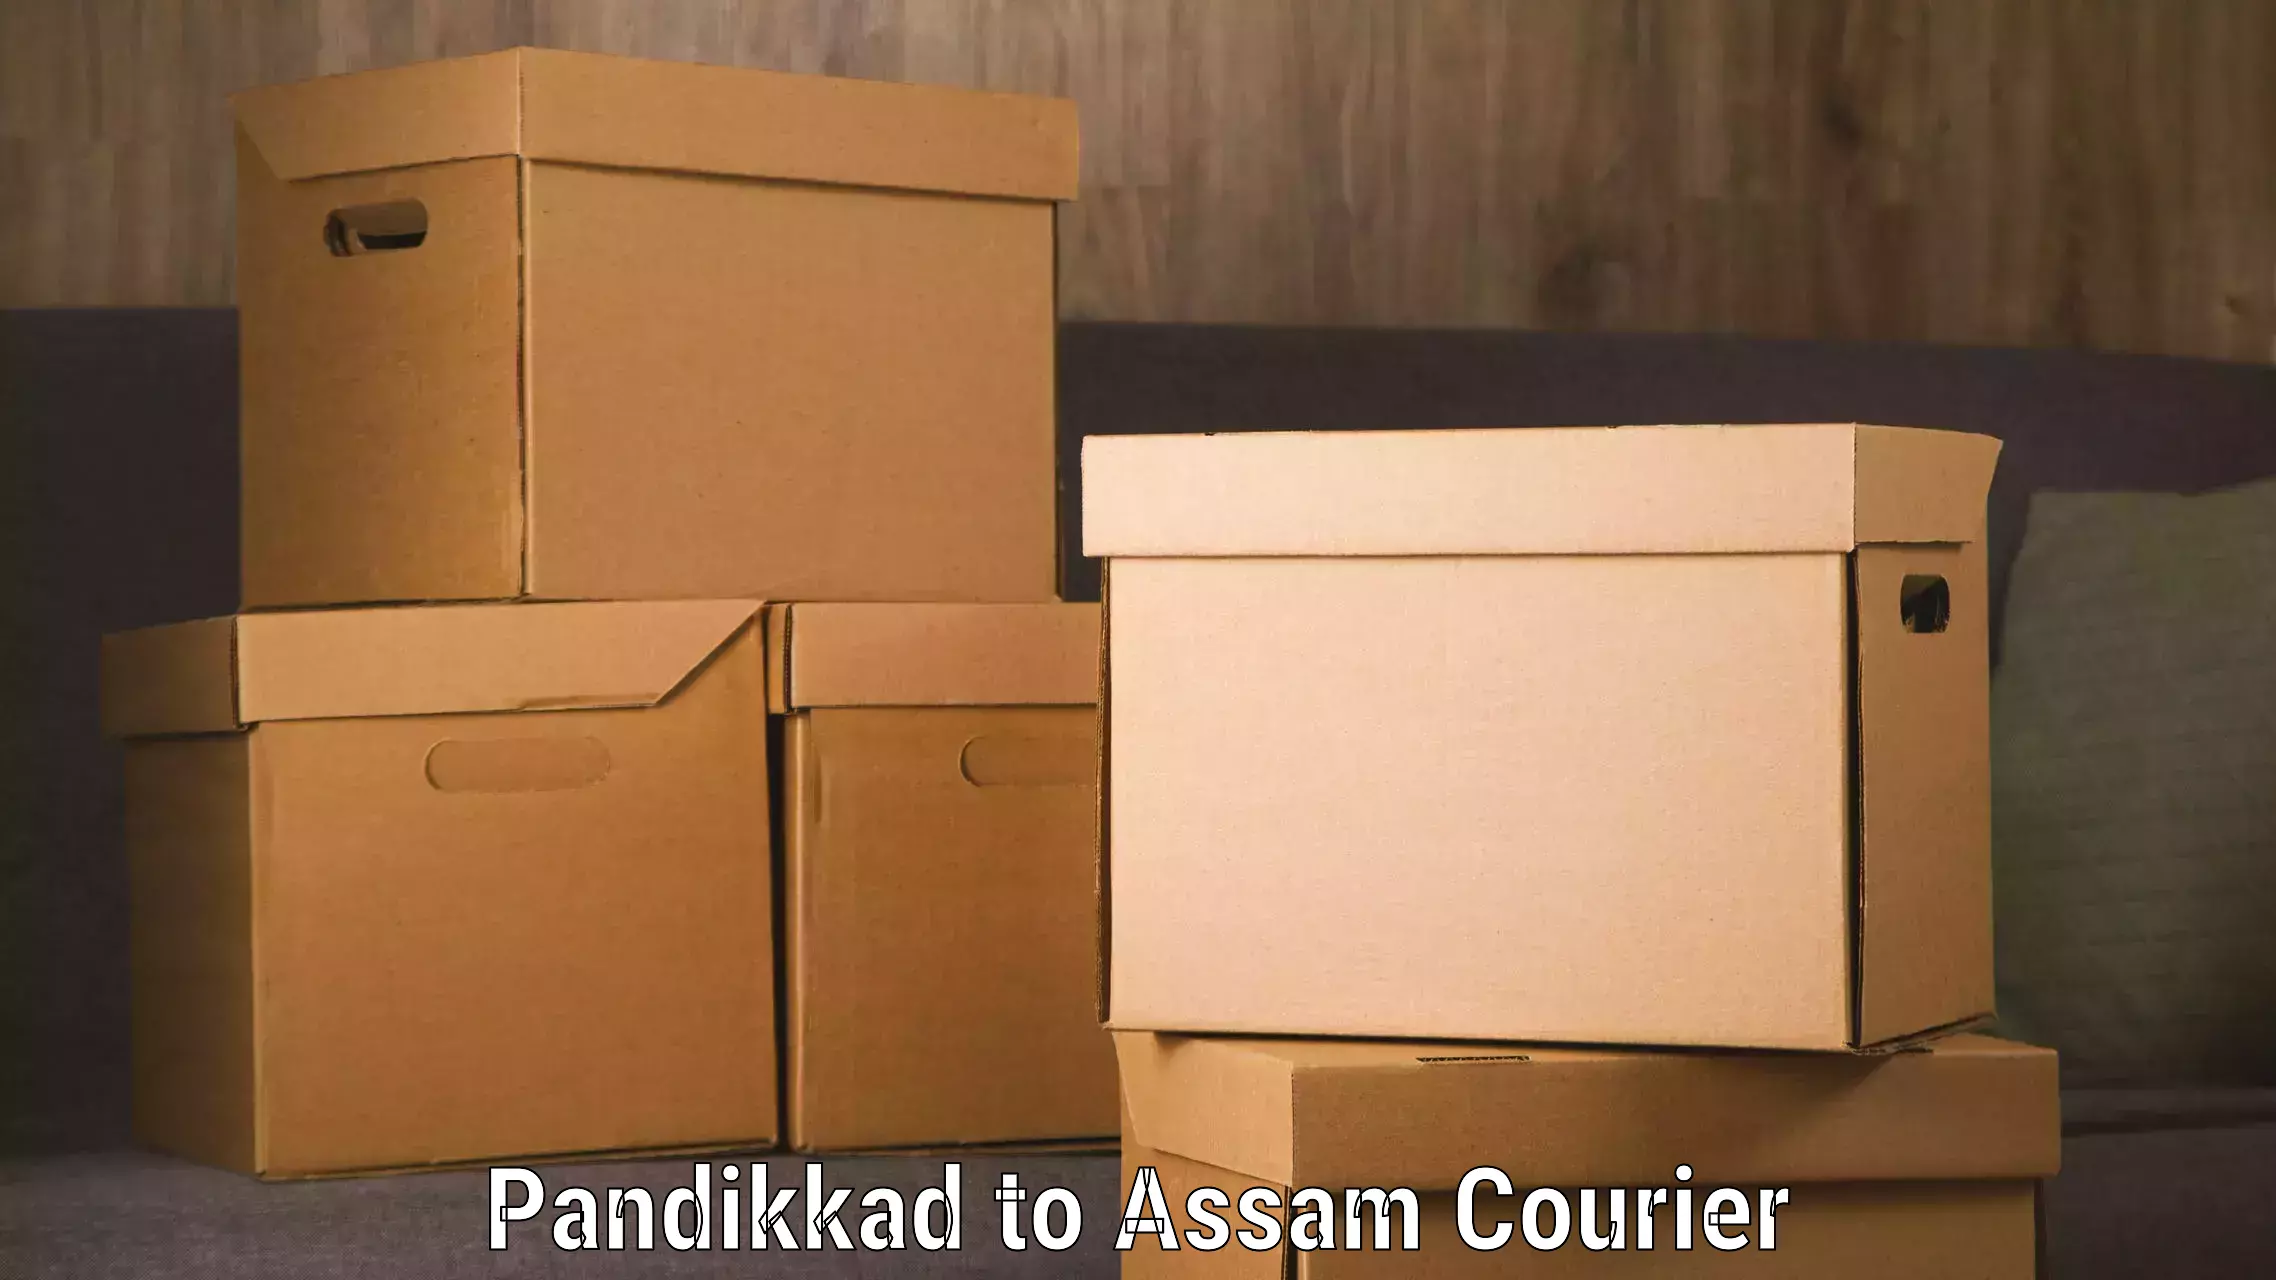 Remote area delivery Pandikkad to Assam